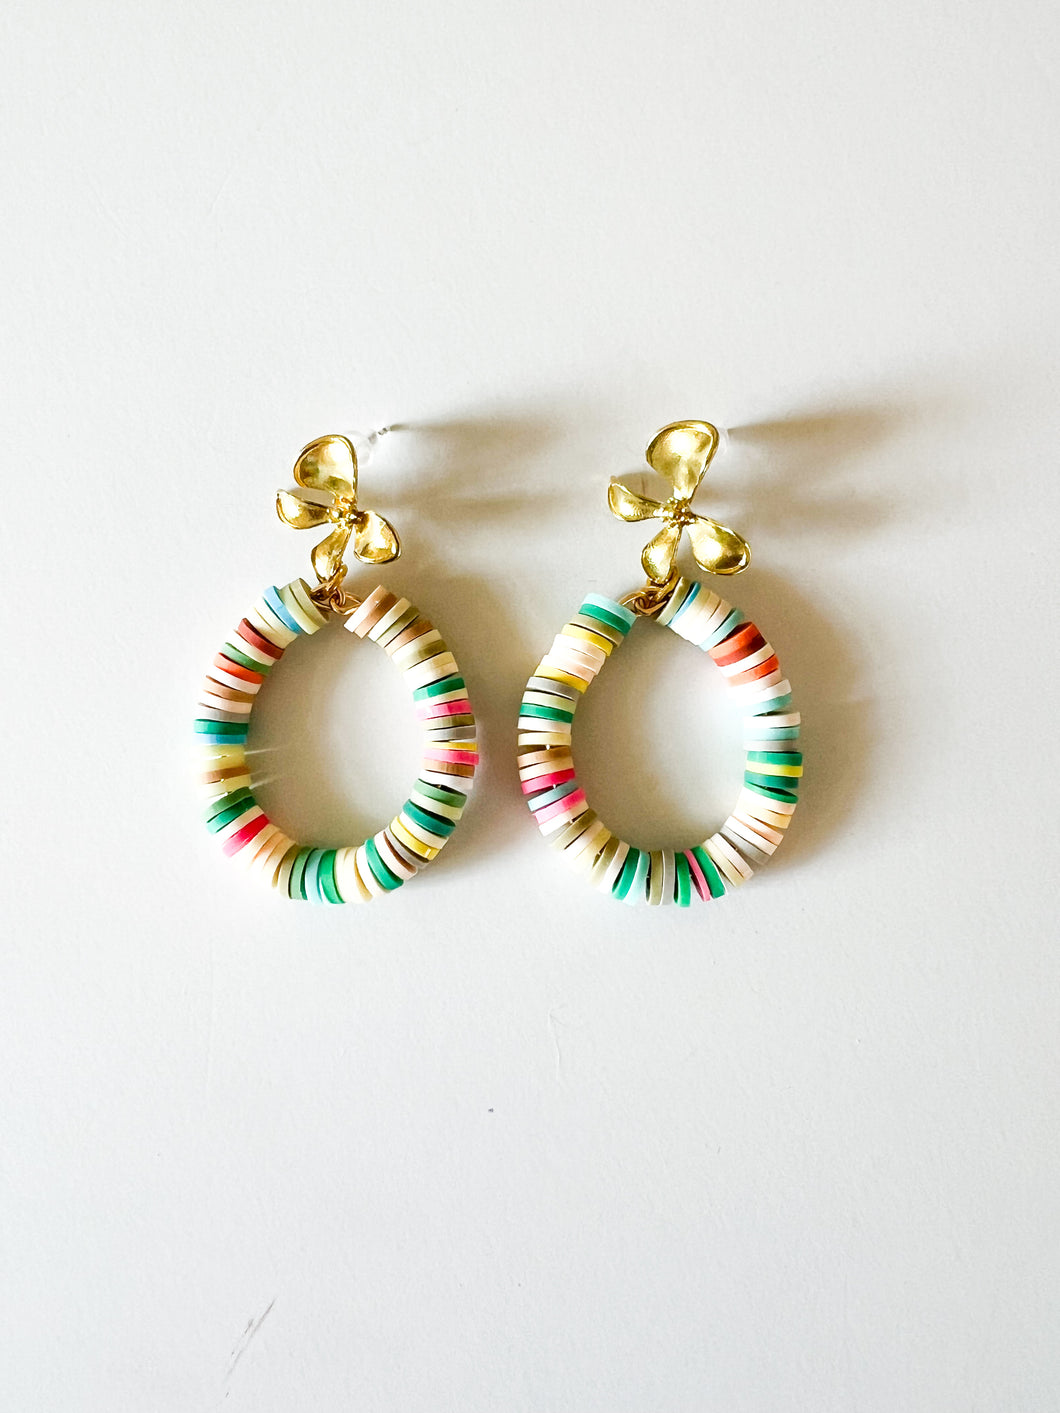 Floral Brass with Confetti Clay Earrings